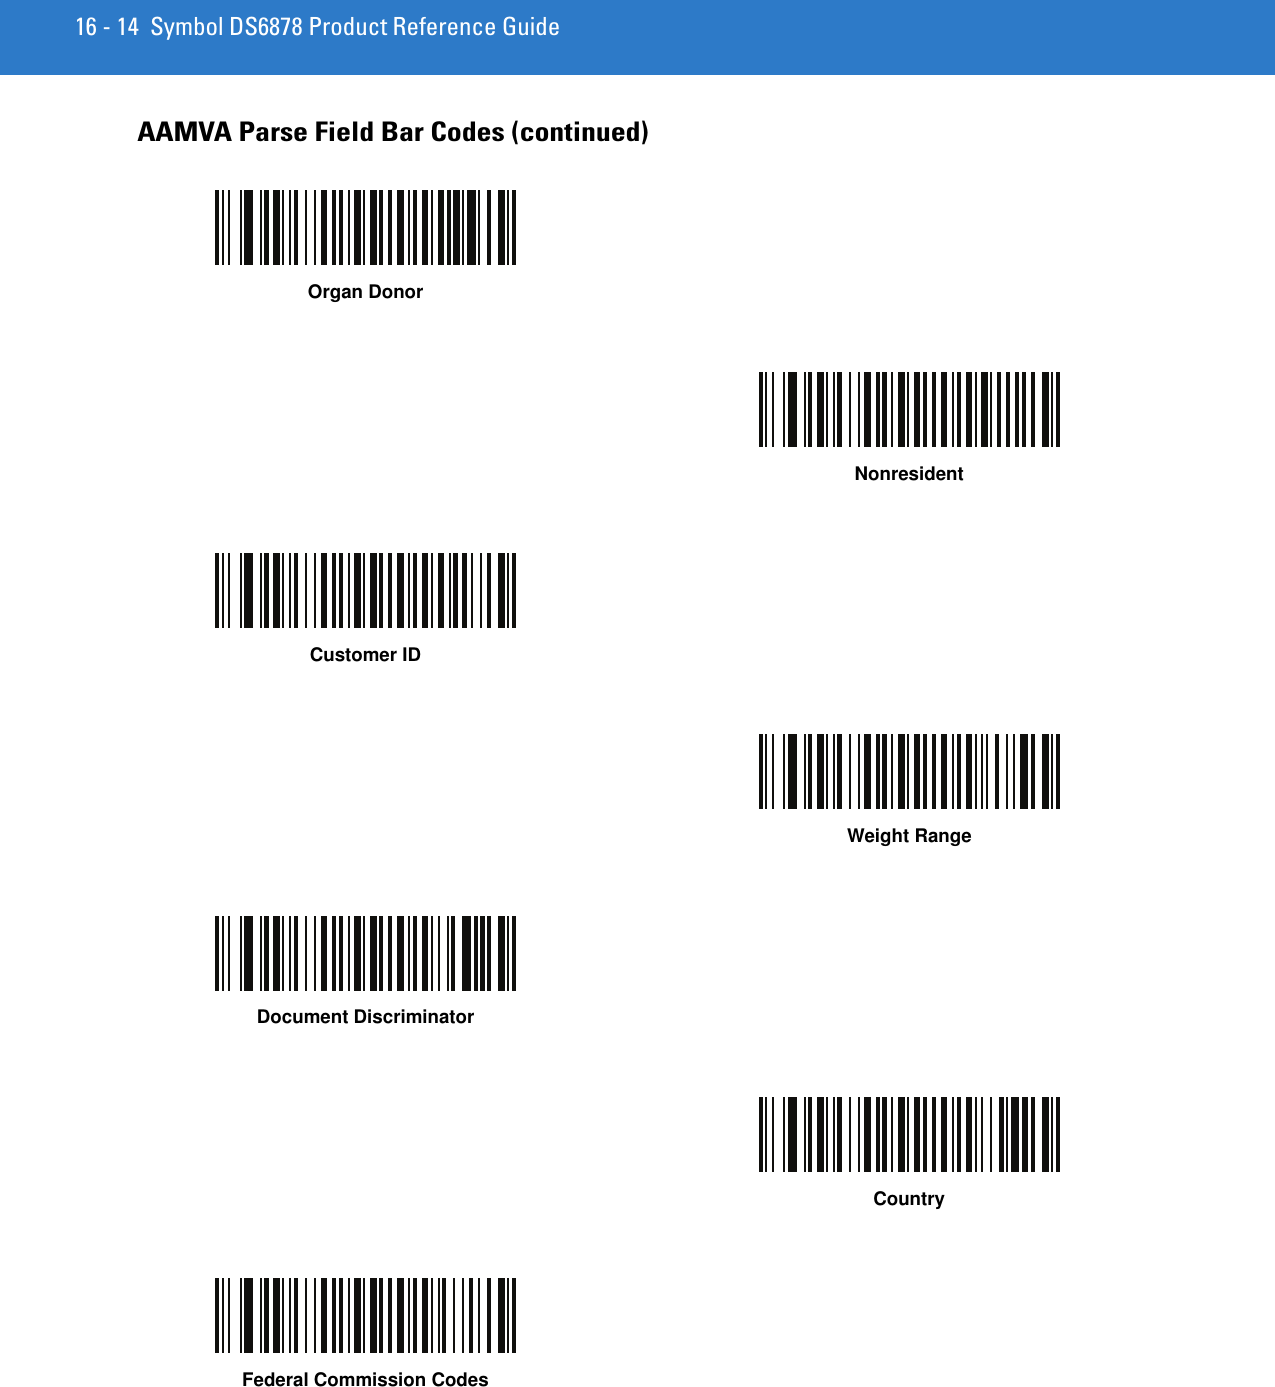 16 - 14 Symbol DS6878 Product Reference GuideAAMVA Parse Field Bar Codes (continued)Organ DonorNonresidentCustomer IDWeight RangeDocument DiscriminatorCountryFederal Commission Codes